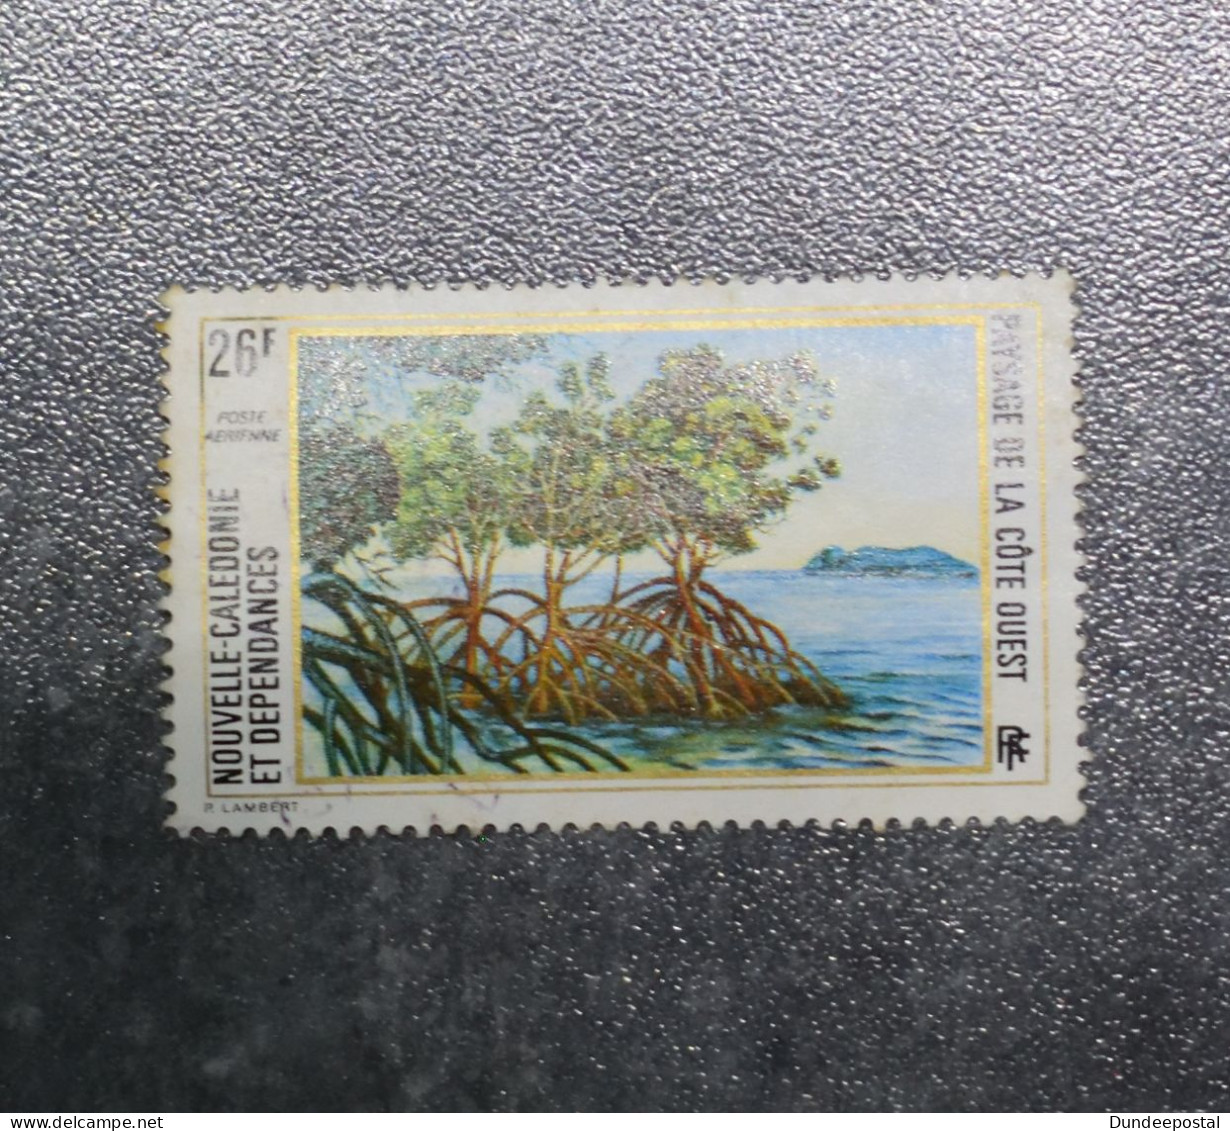 NEW CALEDONIA   FRANCE   STAMPS  1983      ~~L@@K~~ - Gebraucht